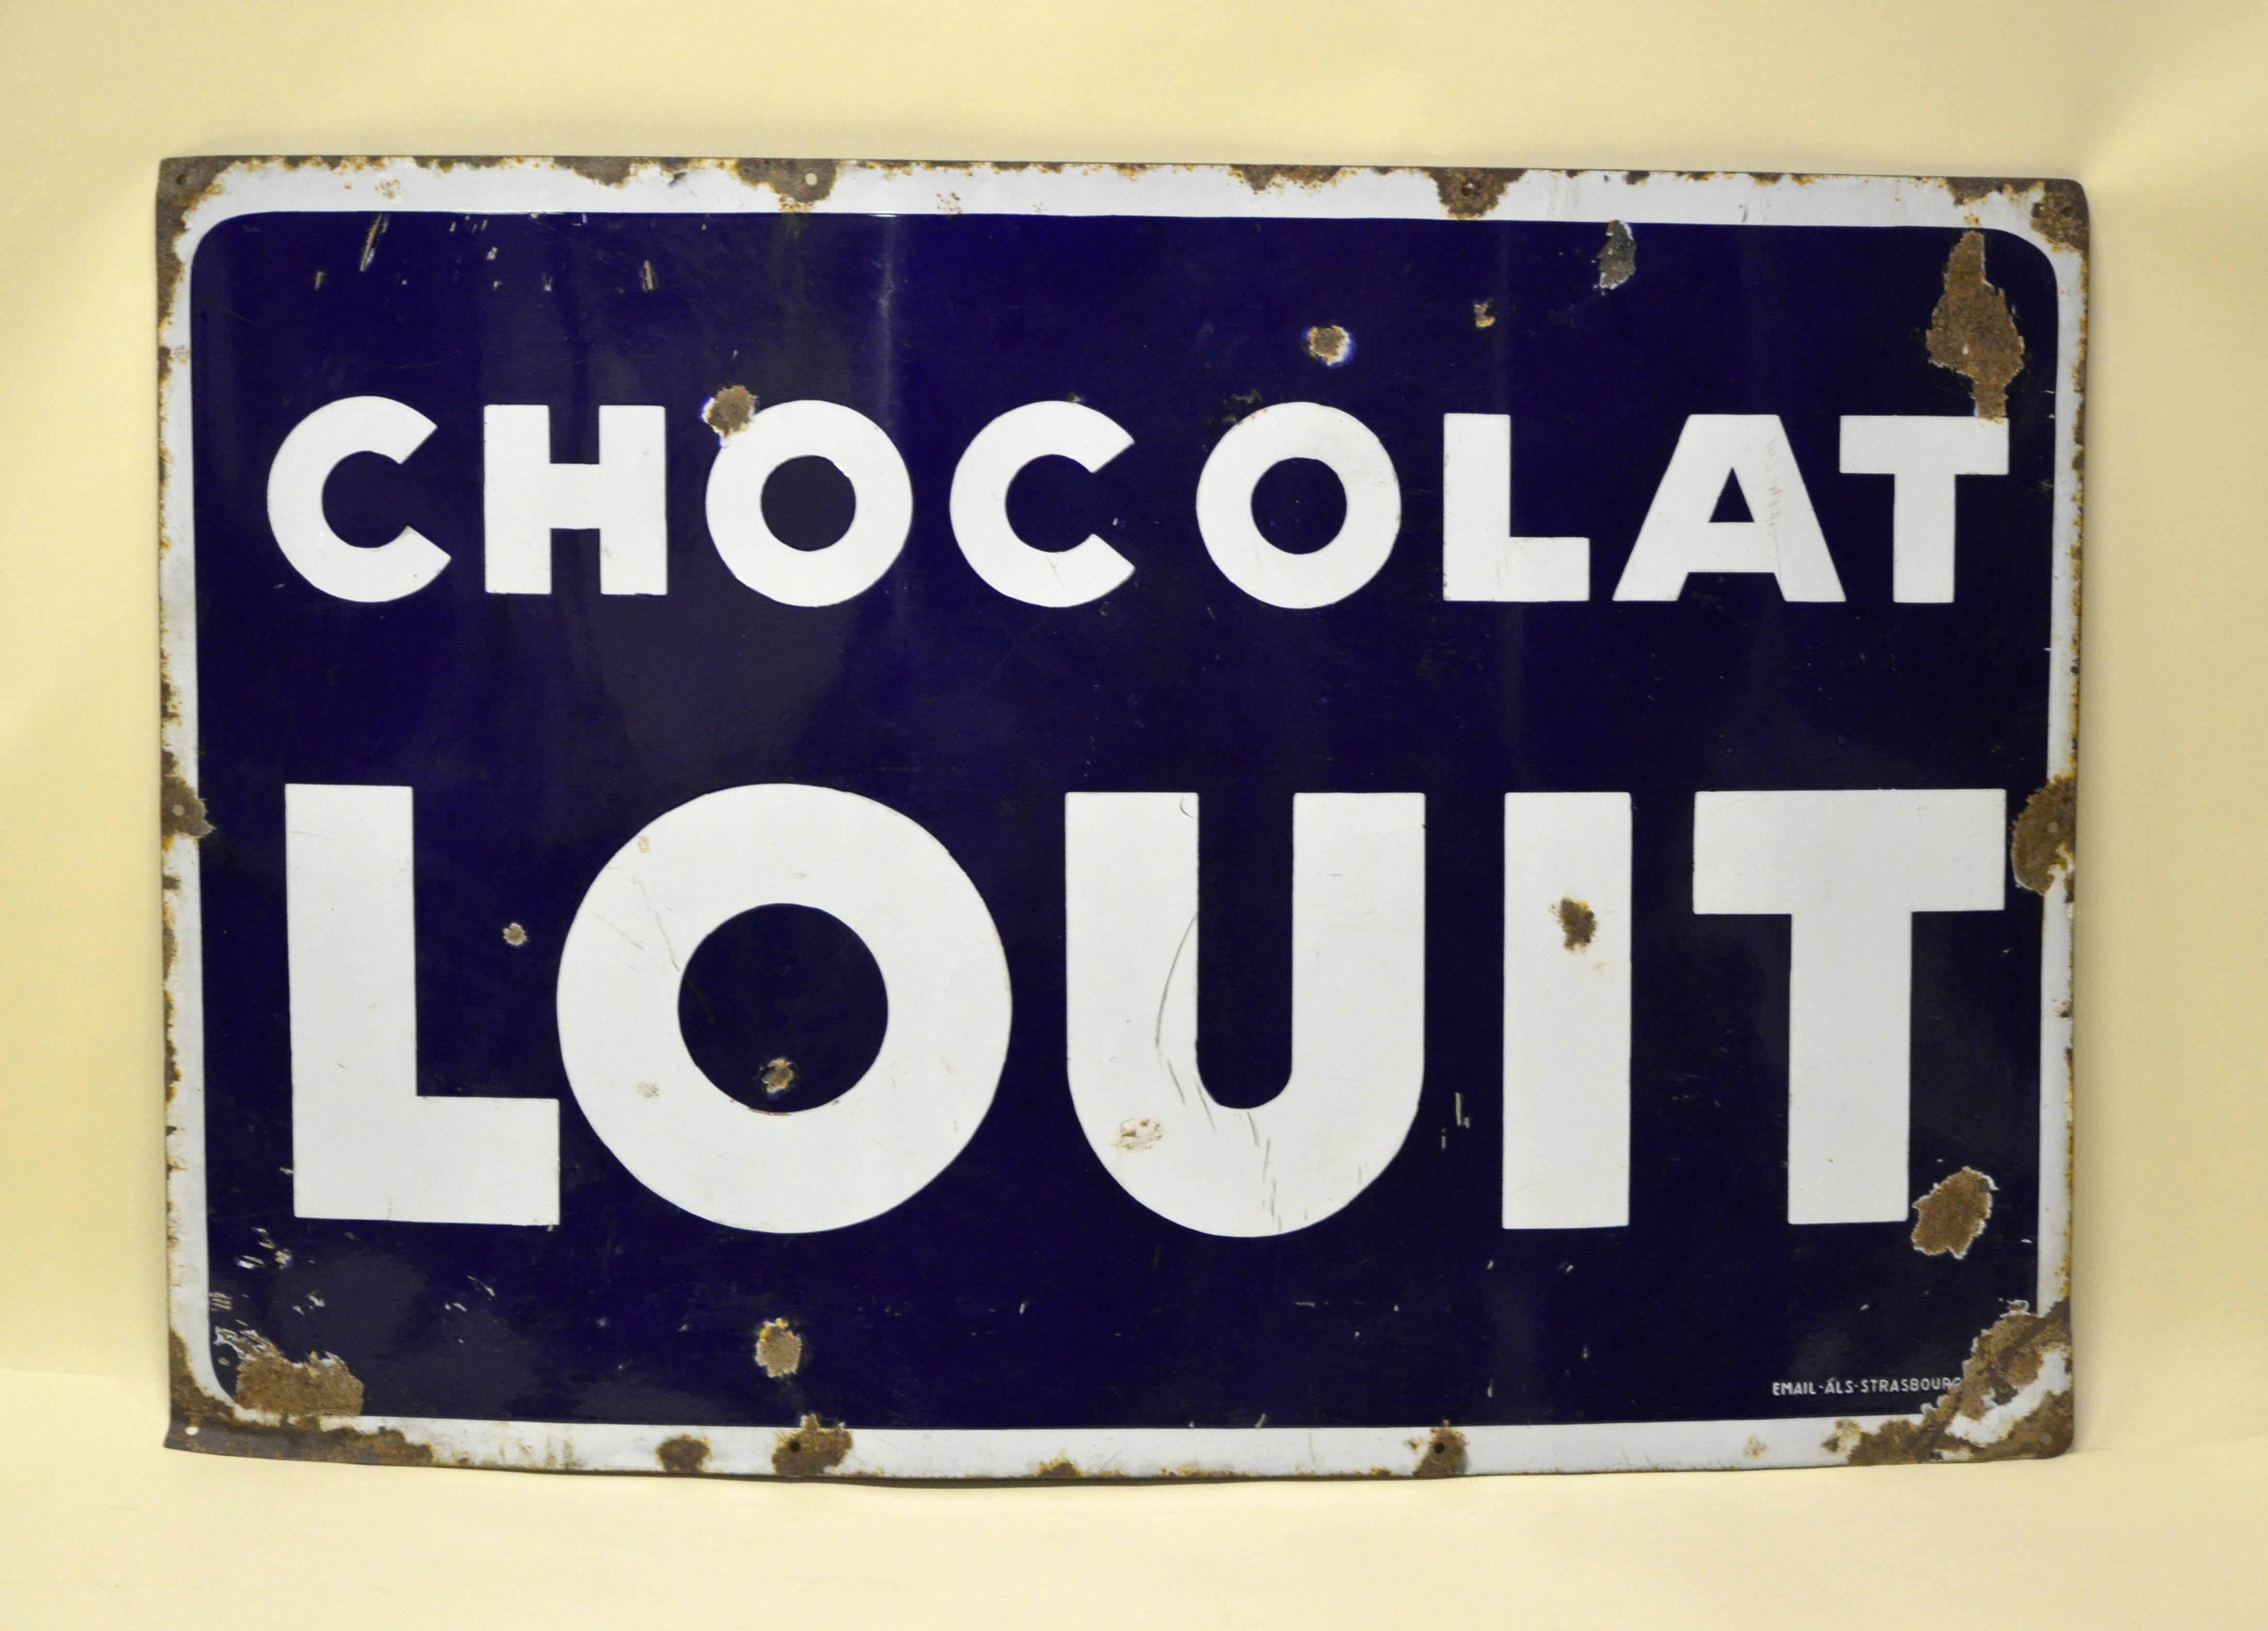 1960s large French blue and white enamel metal Chocolate Louit sign. Made in Strasbourg.